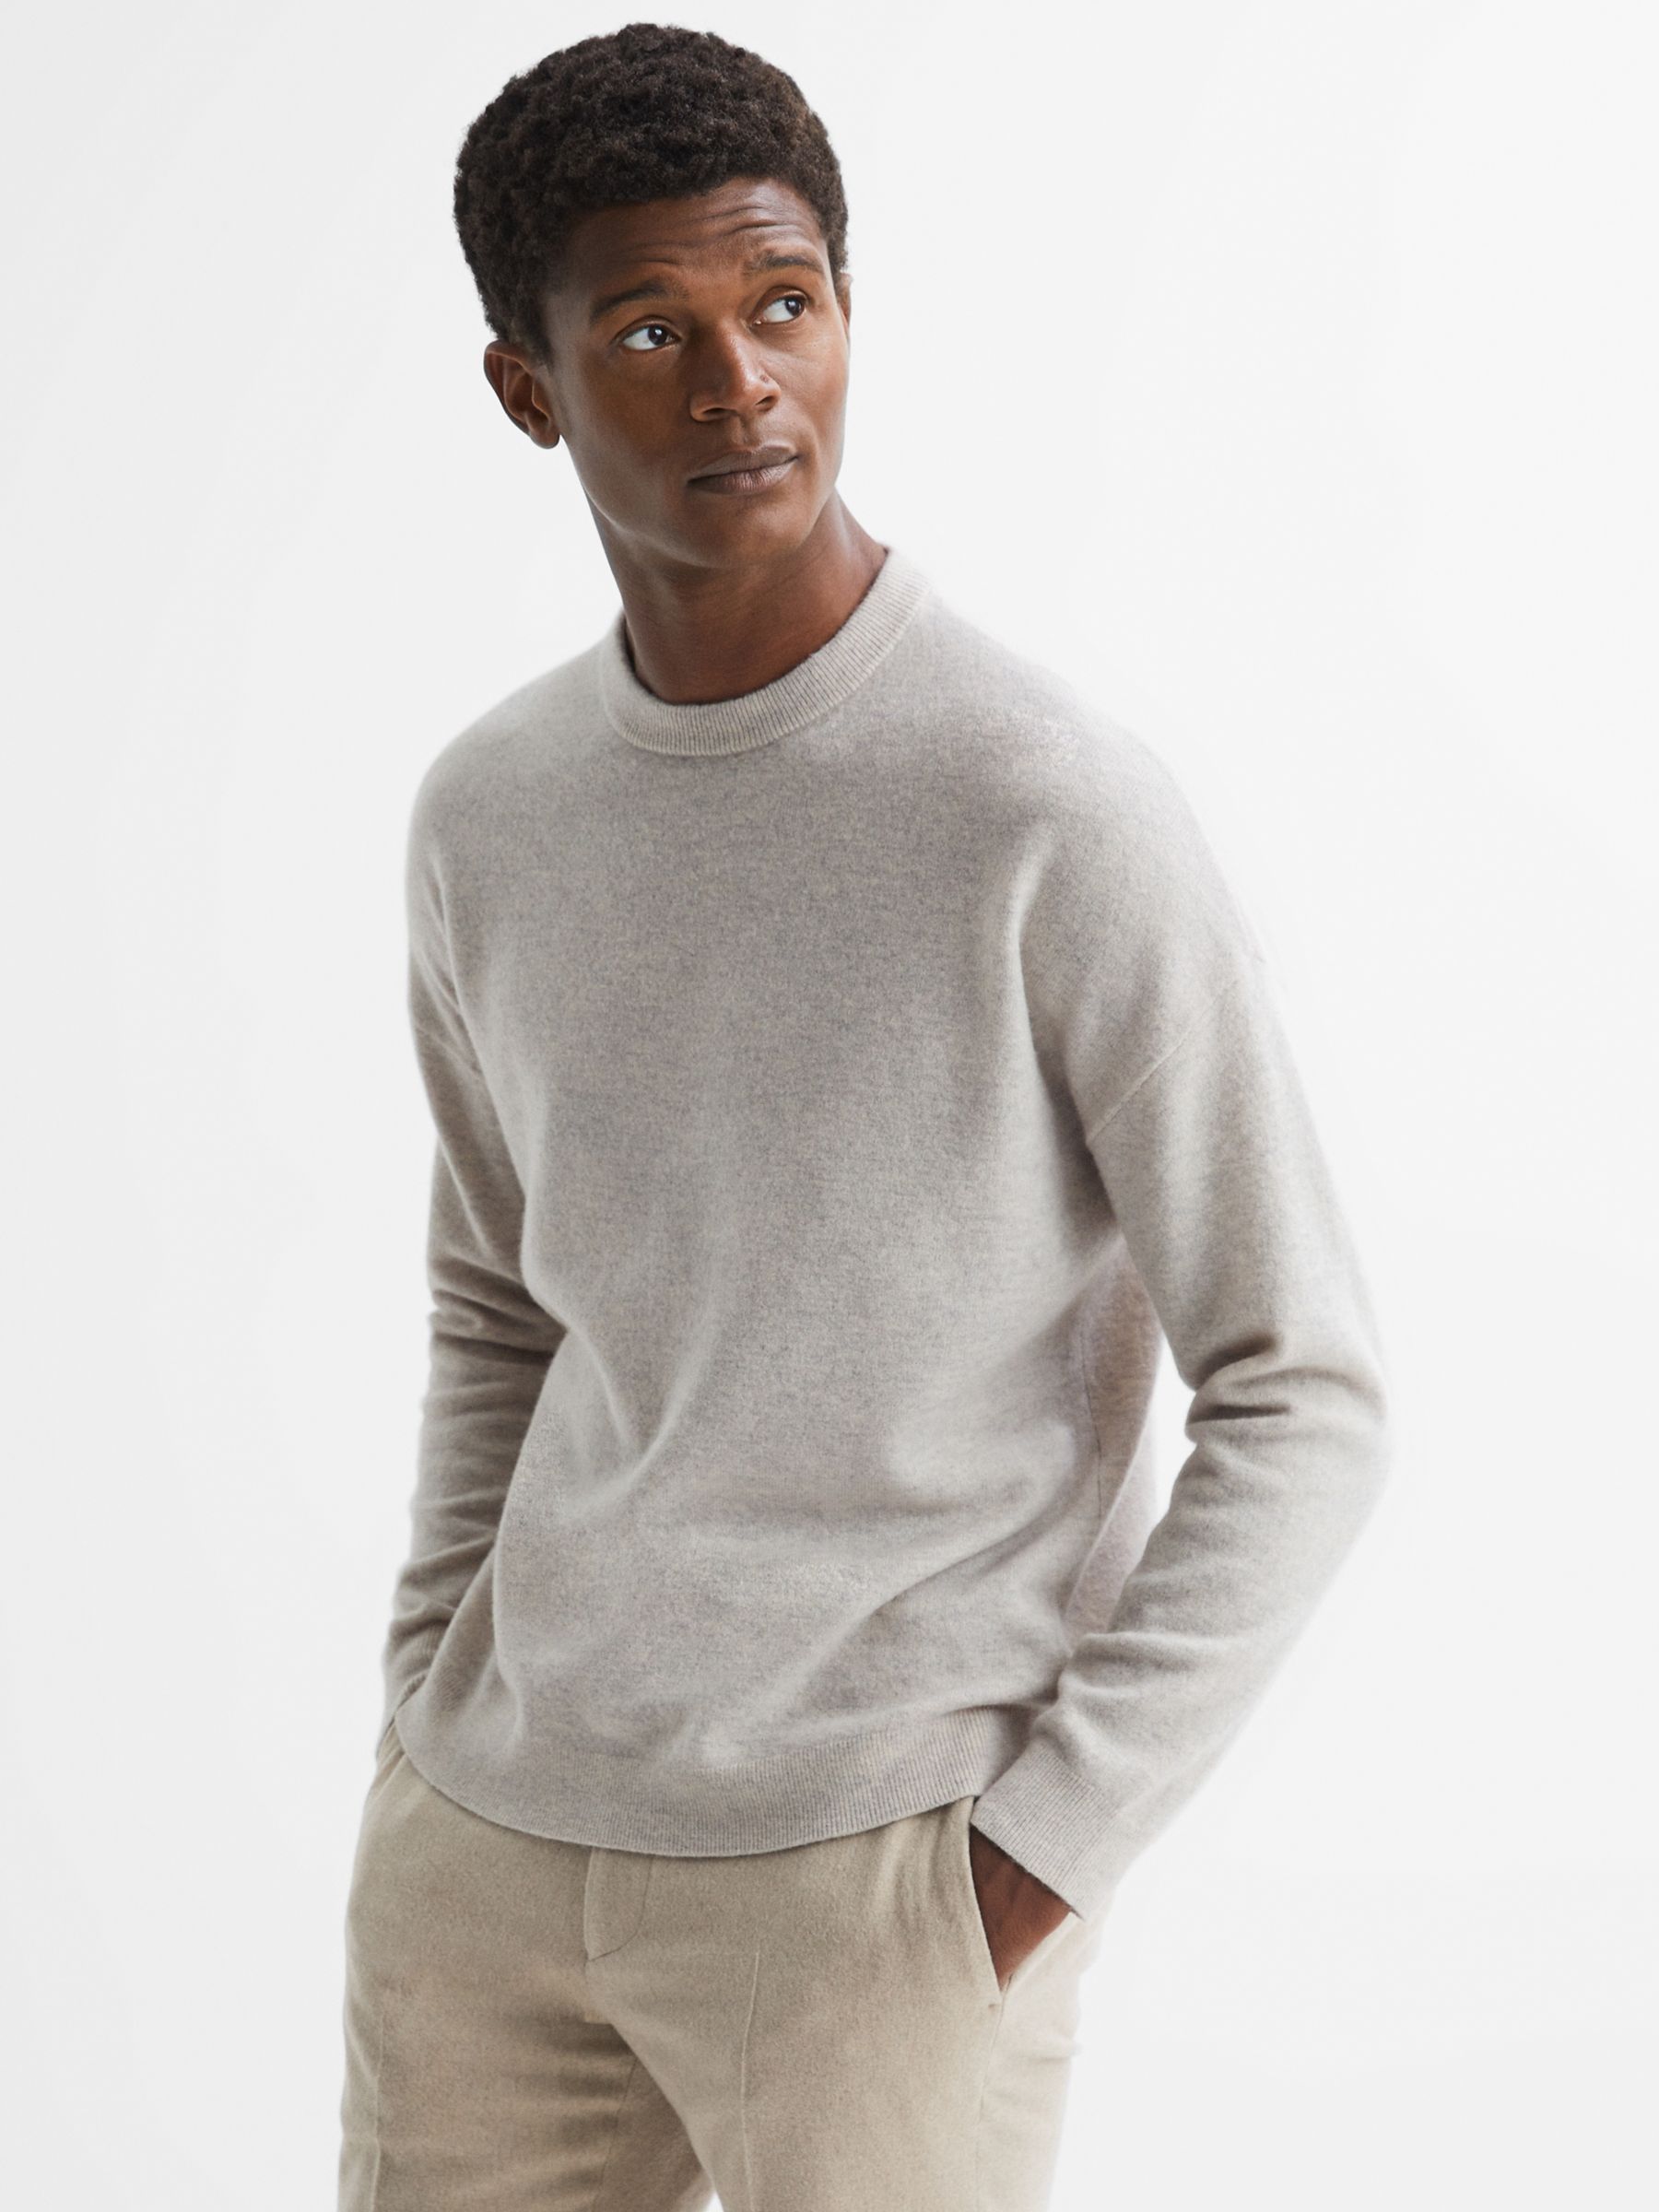 ASOS DESIGN muscle fit waffle knit sweater in oatmeal